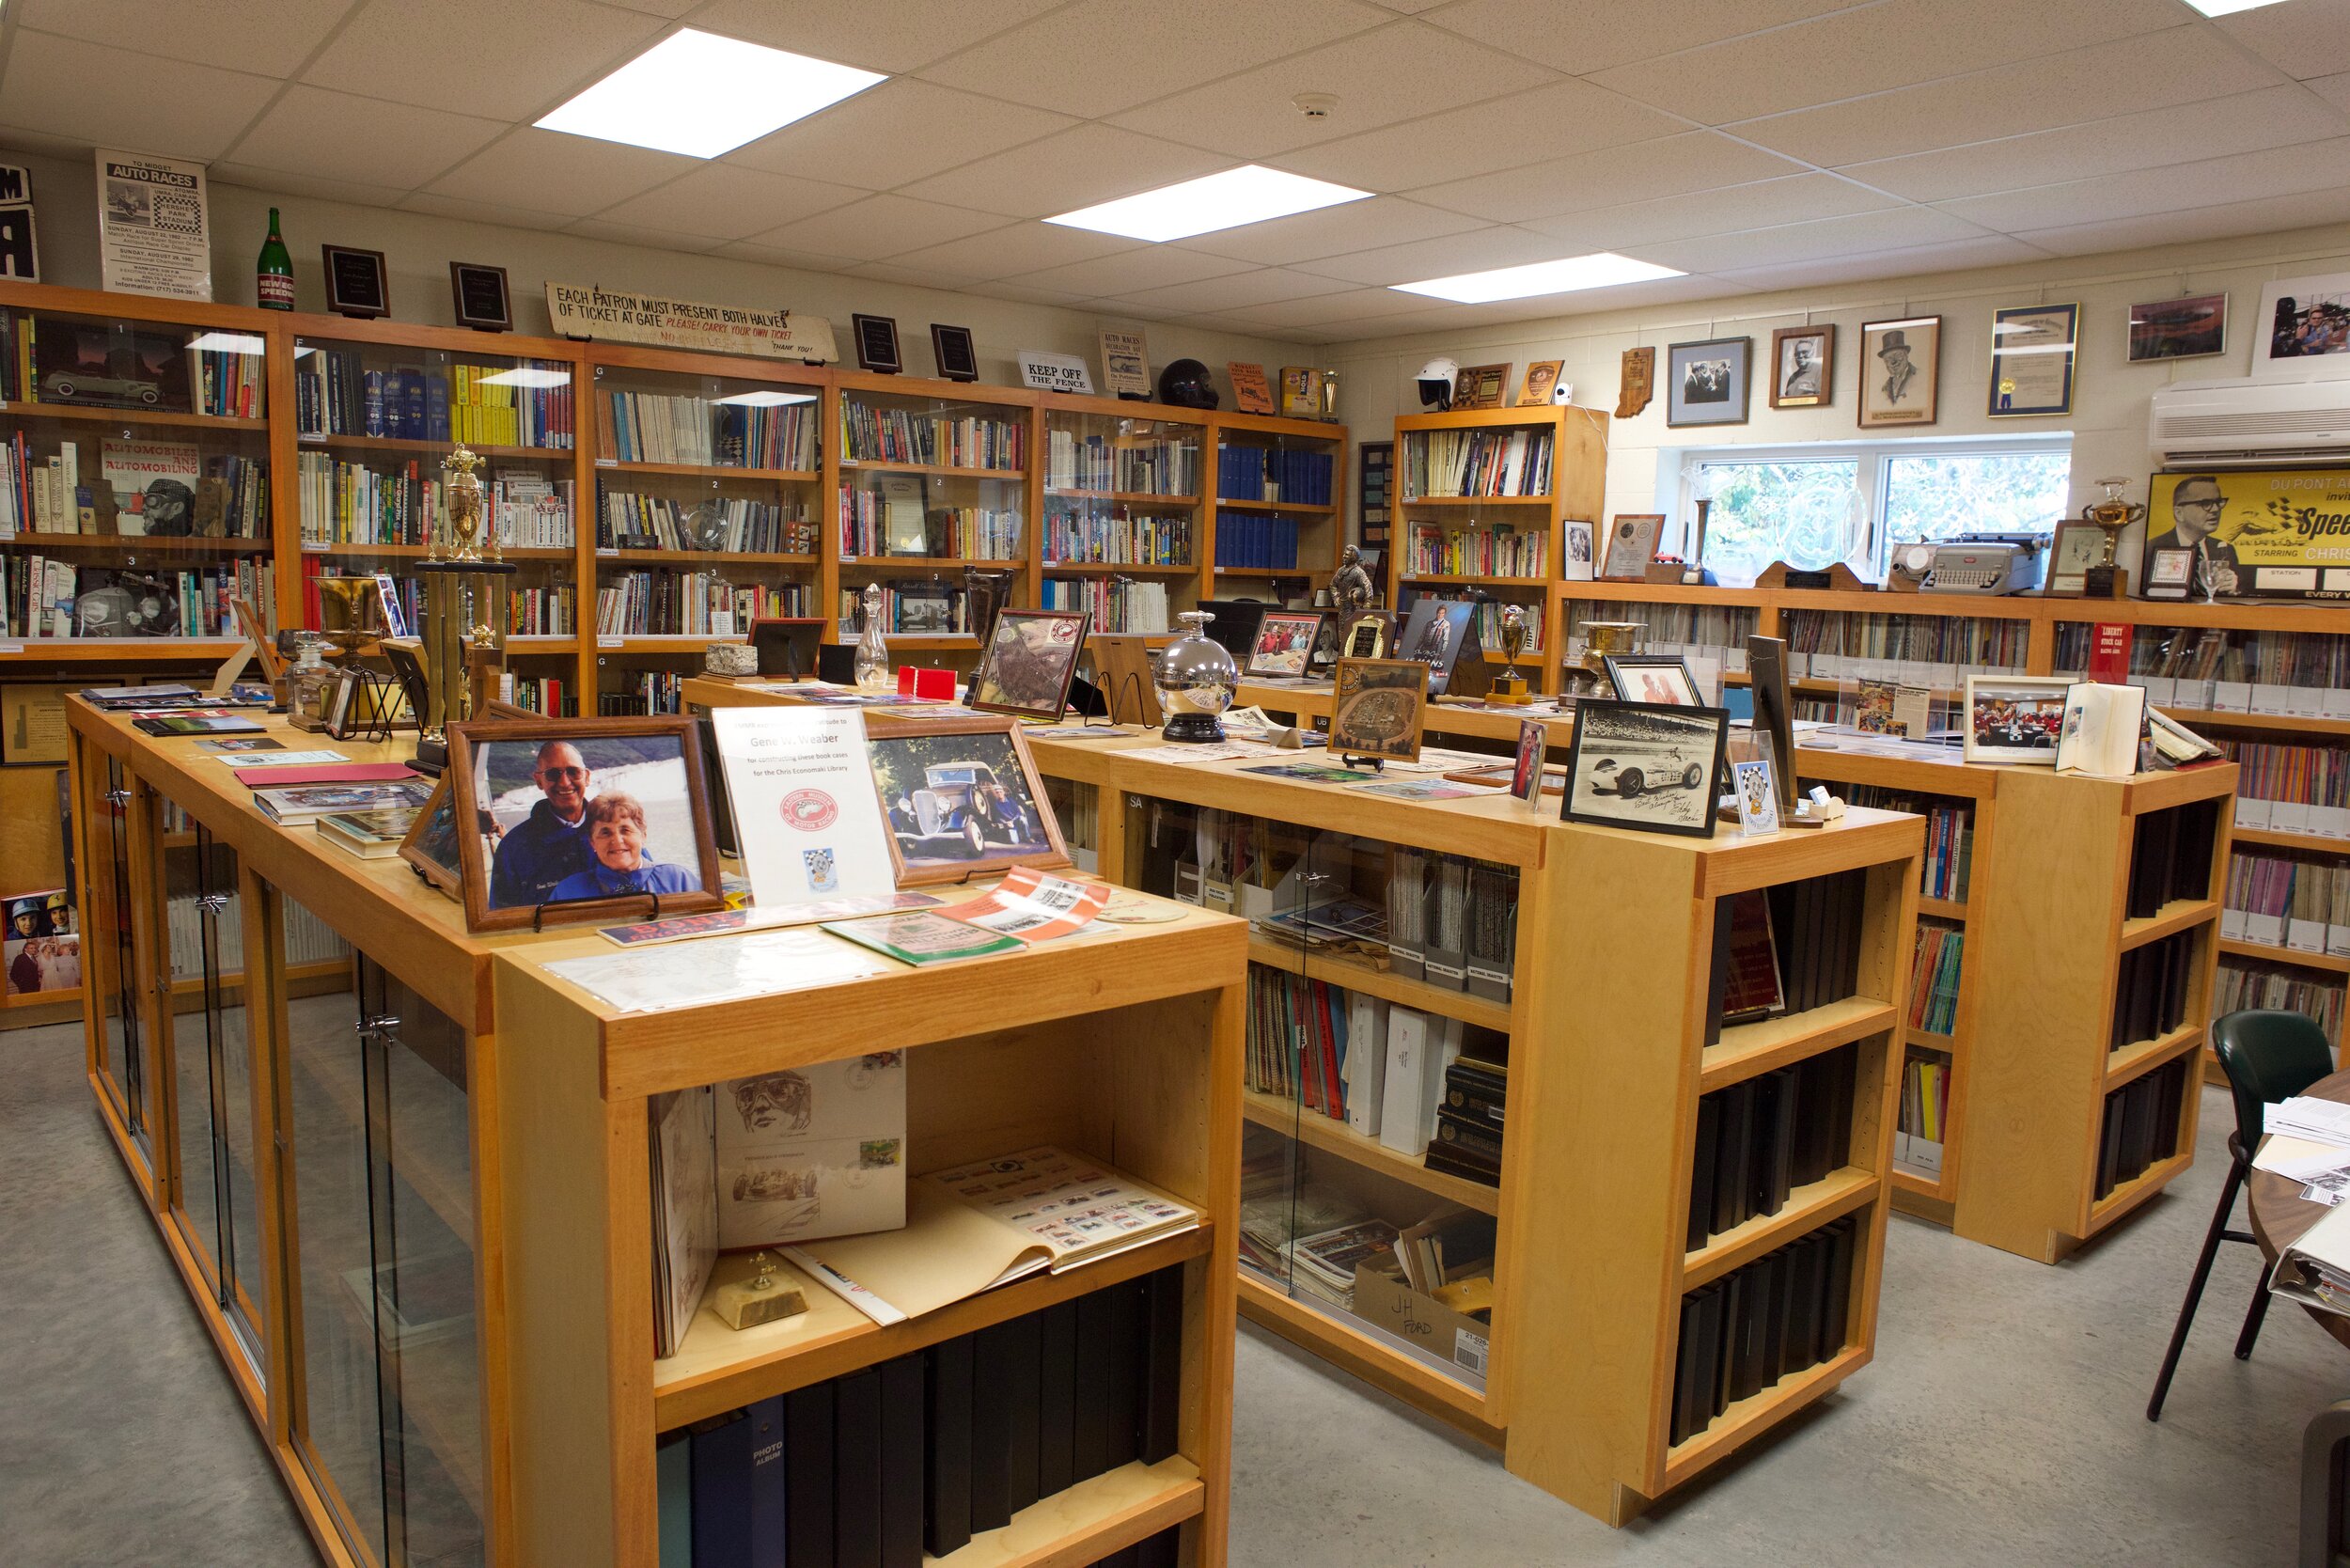  The research library at the Eastern Museum of Motor Racing has an impressive collection of books, photos and racing related papers. 